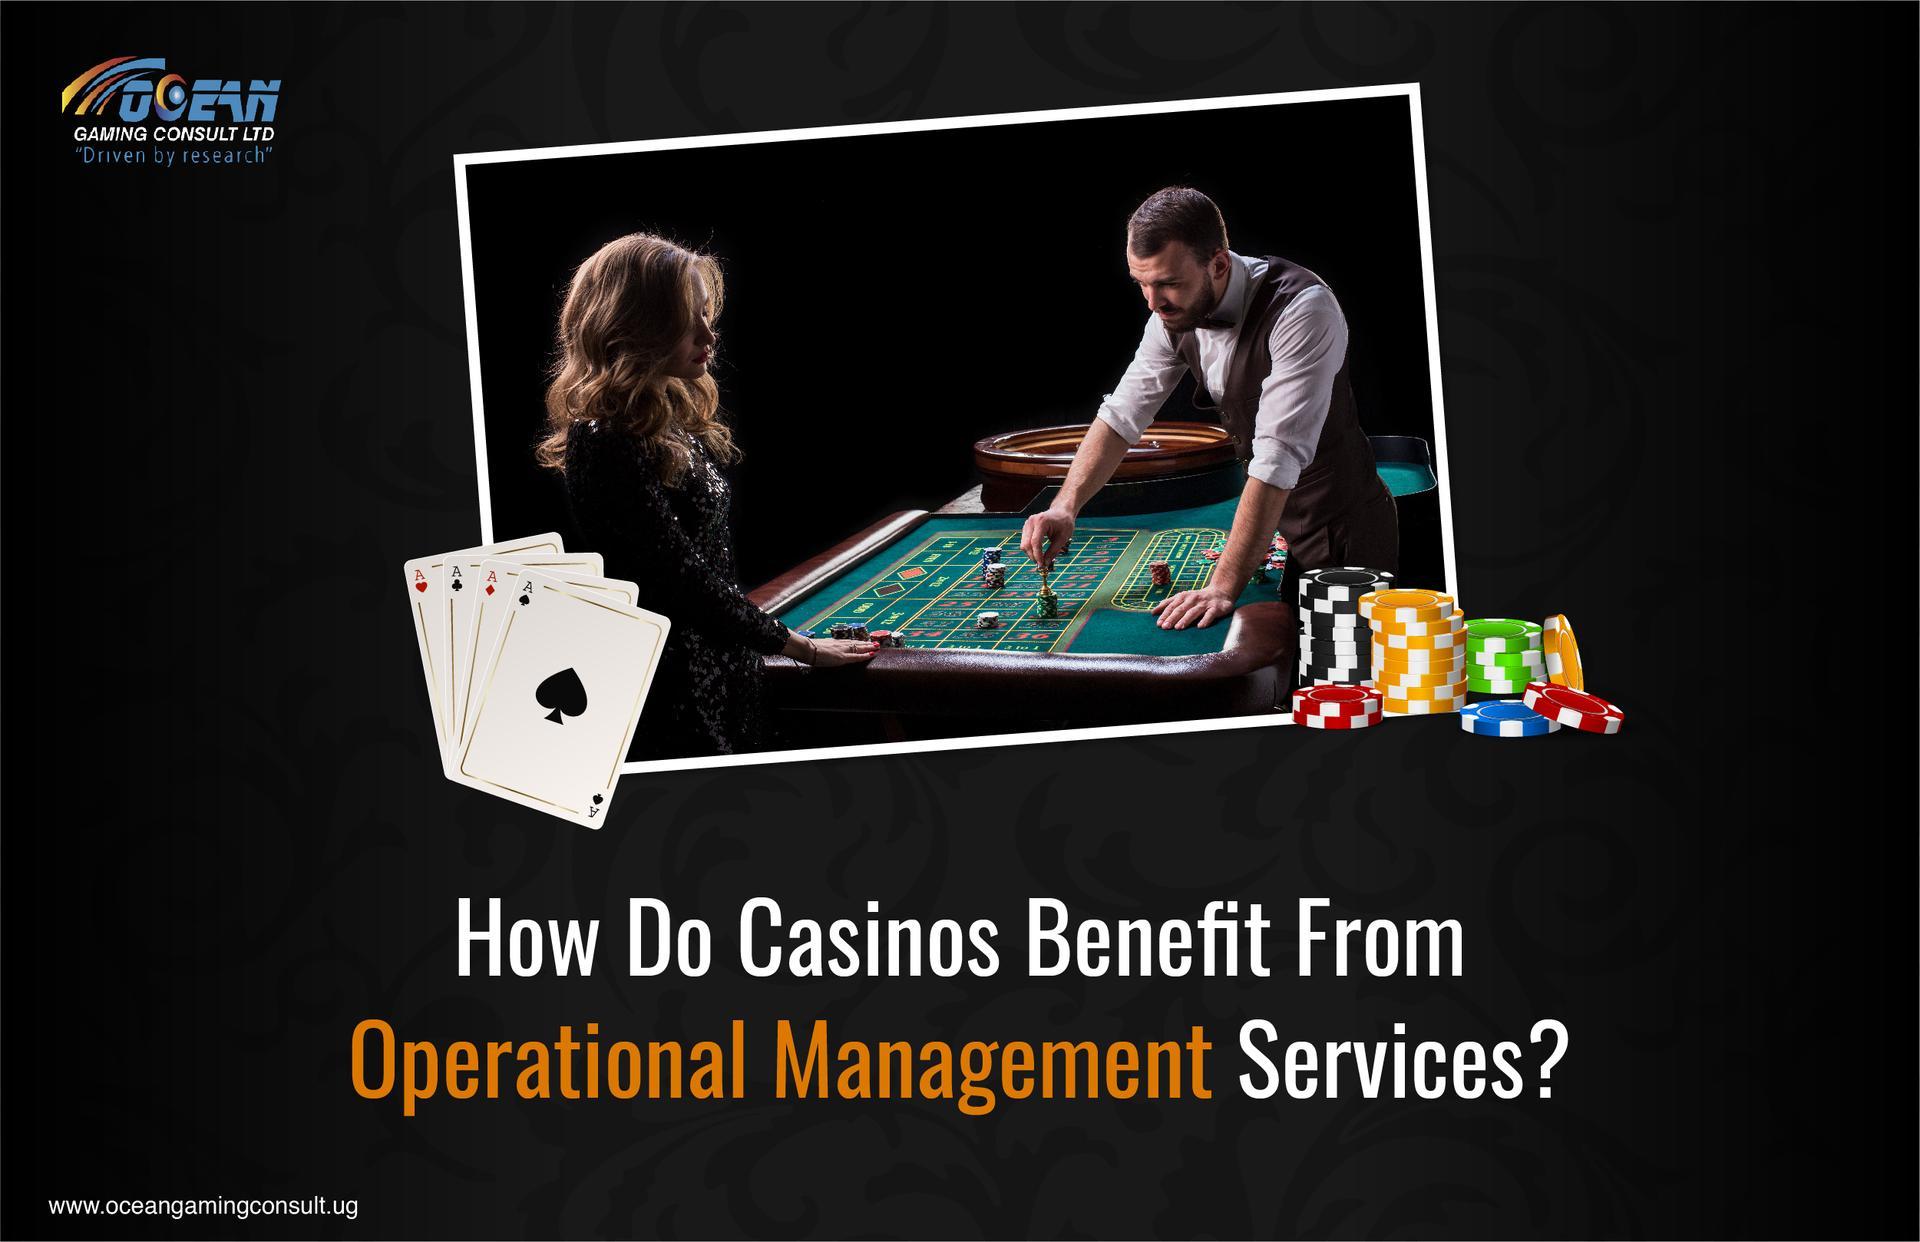 How Do Casinos Benefit From Operational Management Services?